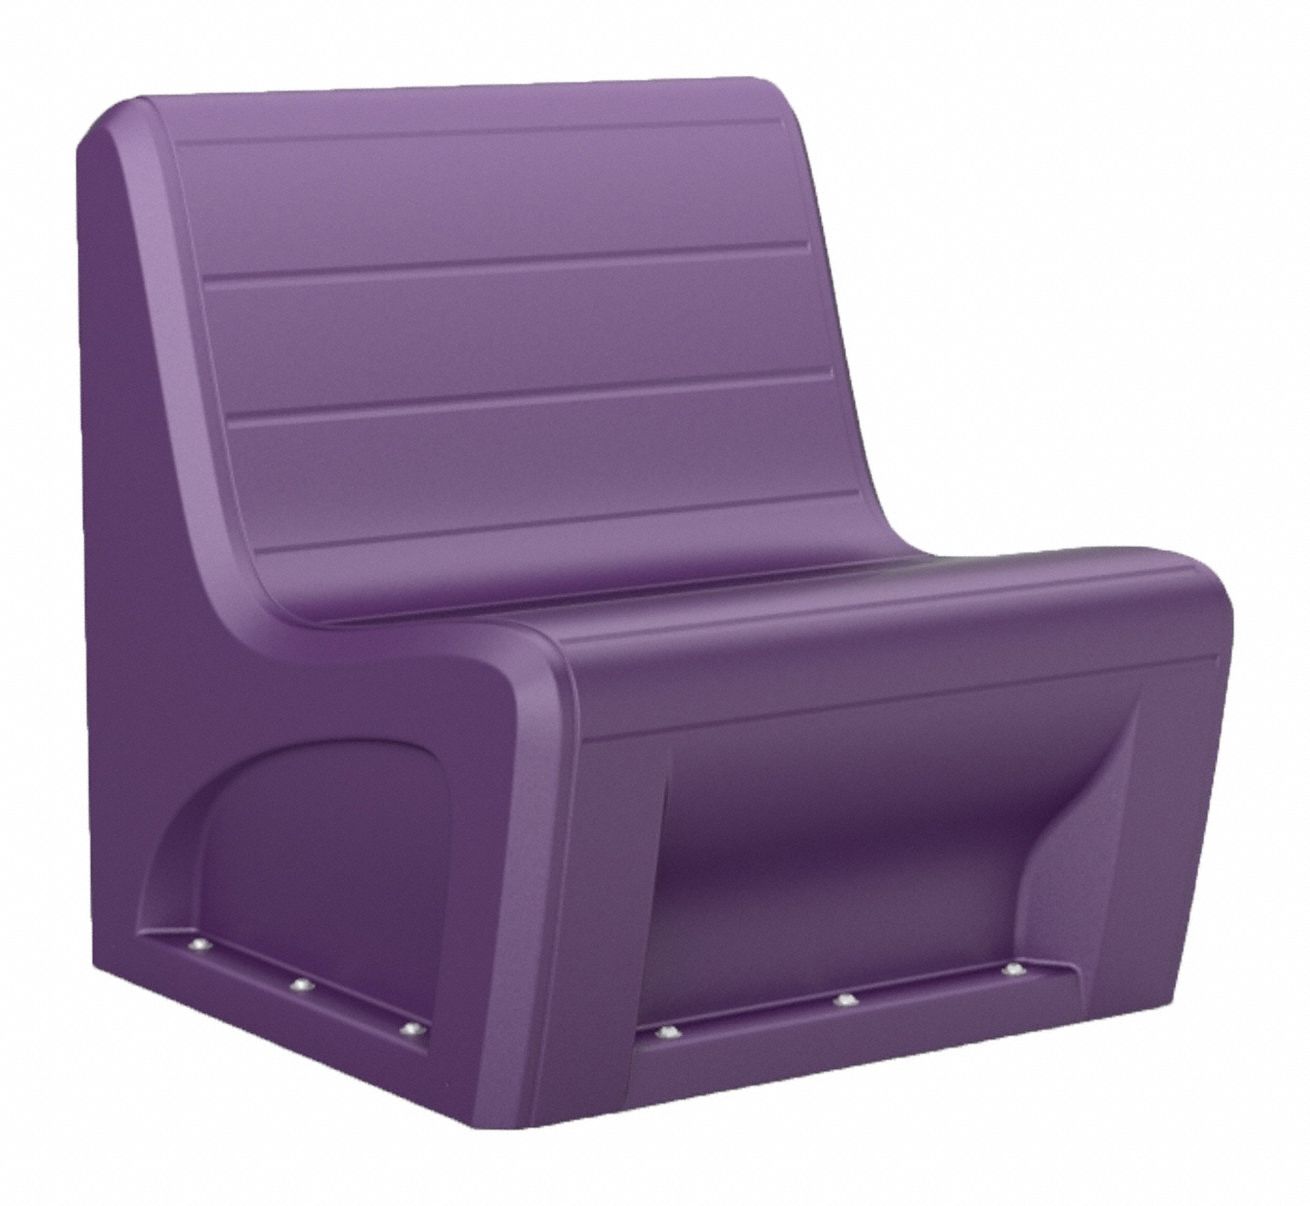 Sabre Sectional Chair Indigo: 30 1/2 in Wd, 32 in Lg, 33 in Ht, 500 lb Wt Capacity, Blue